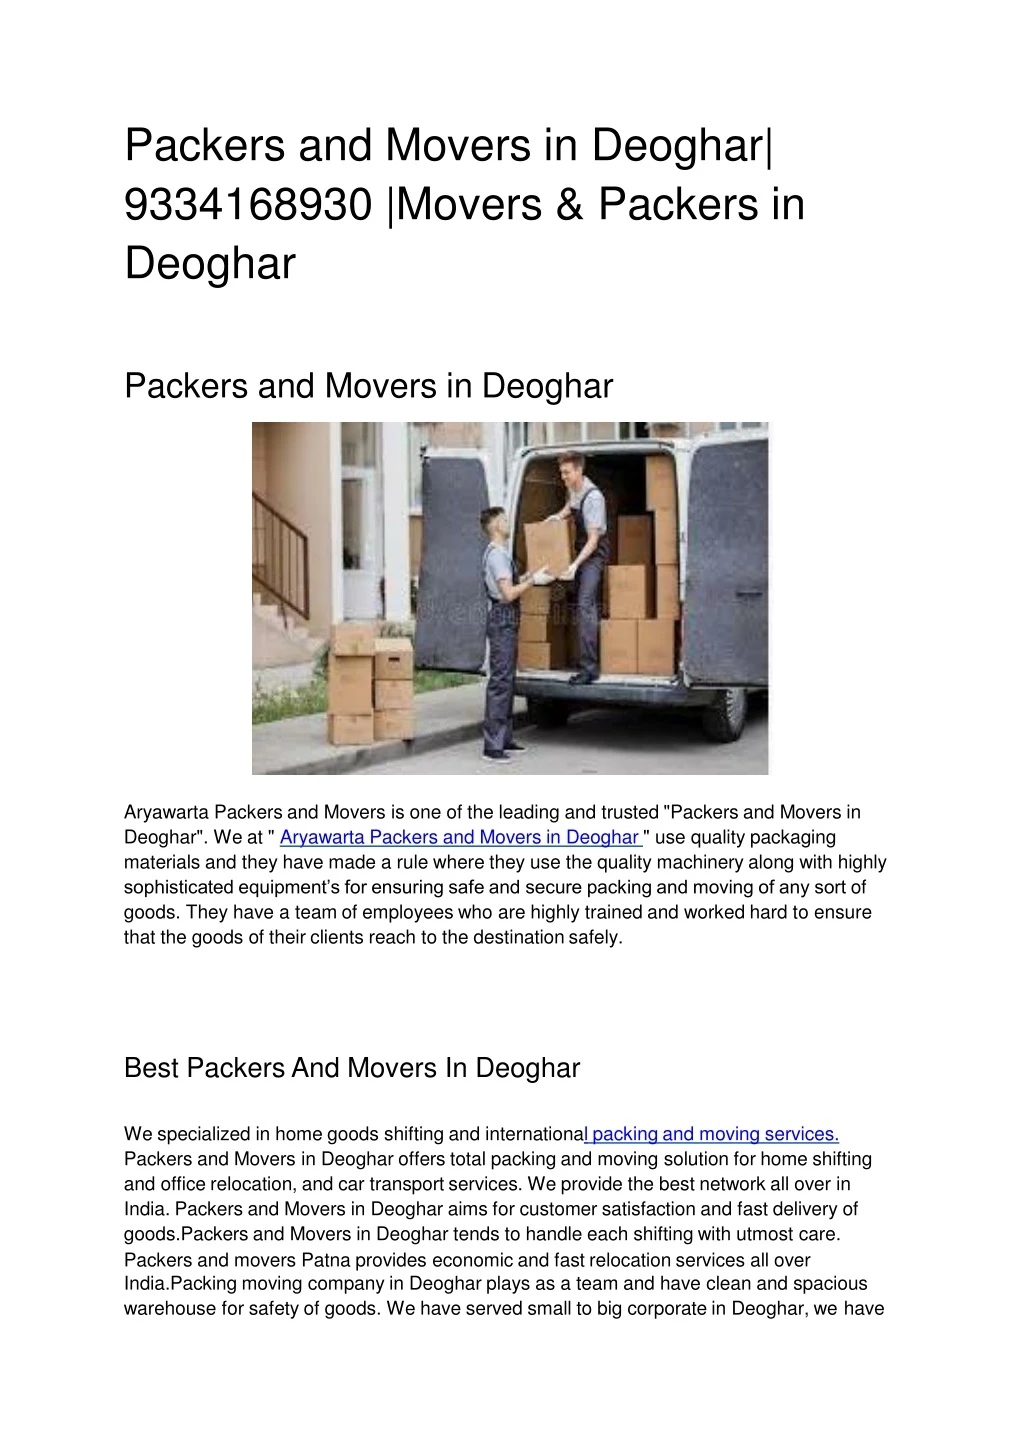 packers and movers in deoghar 9334168930 movers packers in deoghar